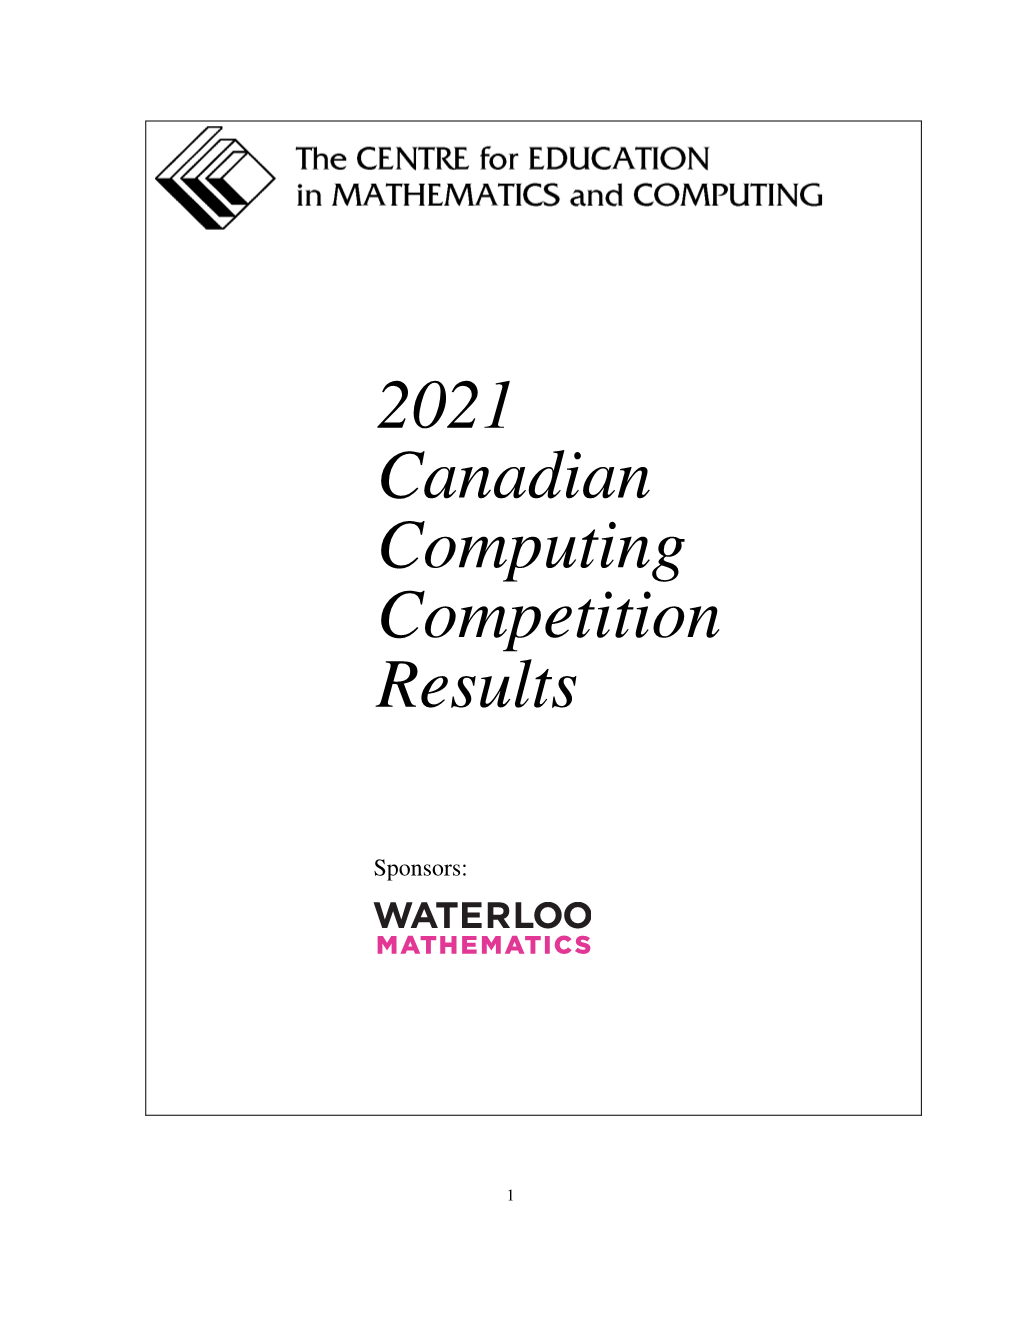 2021 Canadian Computing Competition Results